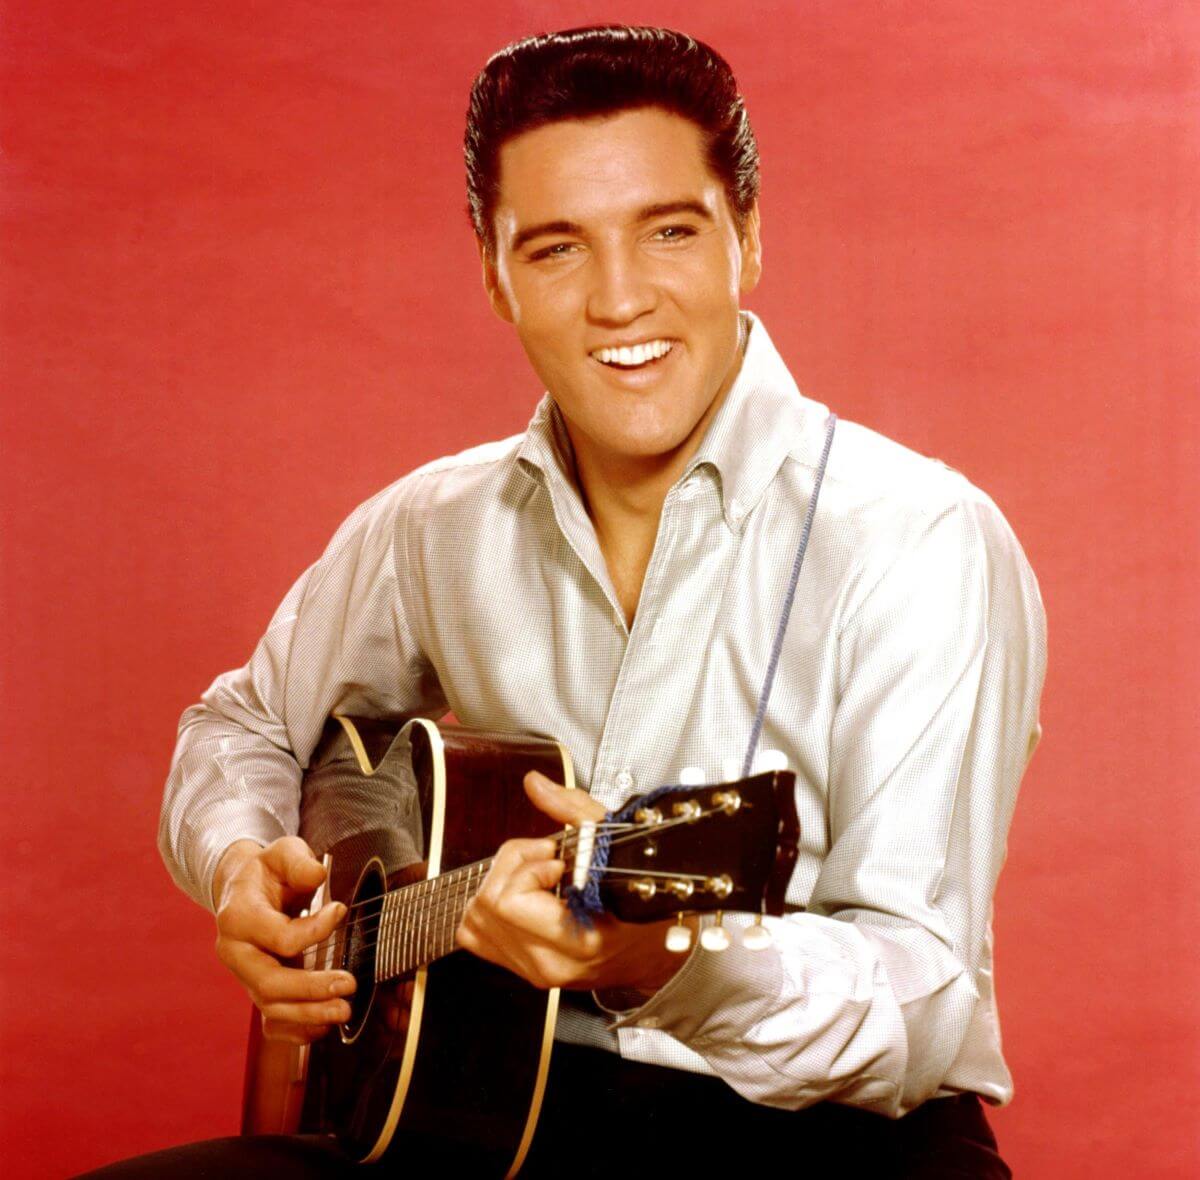 Elvis Presley wears a white shirt and sits with an acoustic guitar. He is in front of a red background.